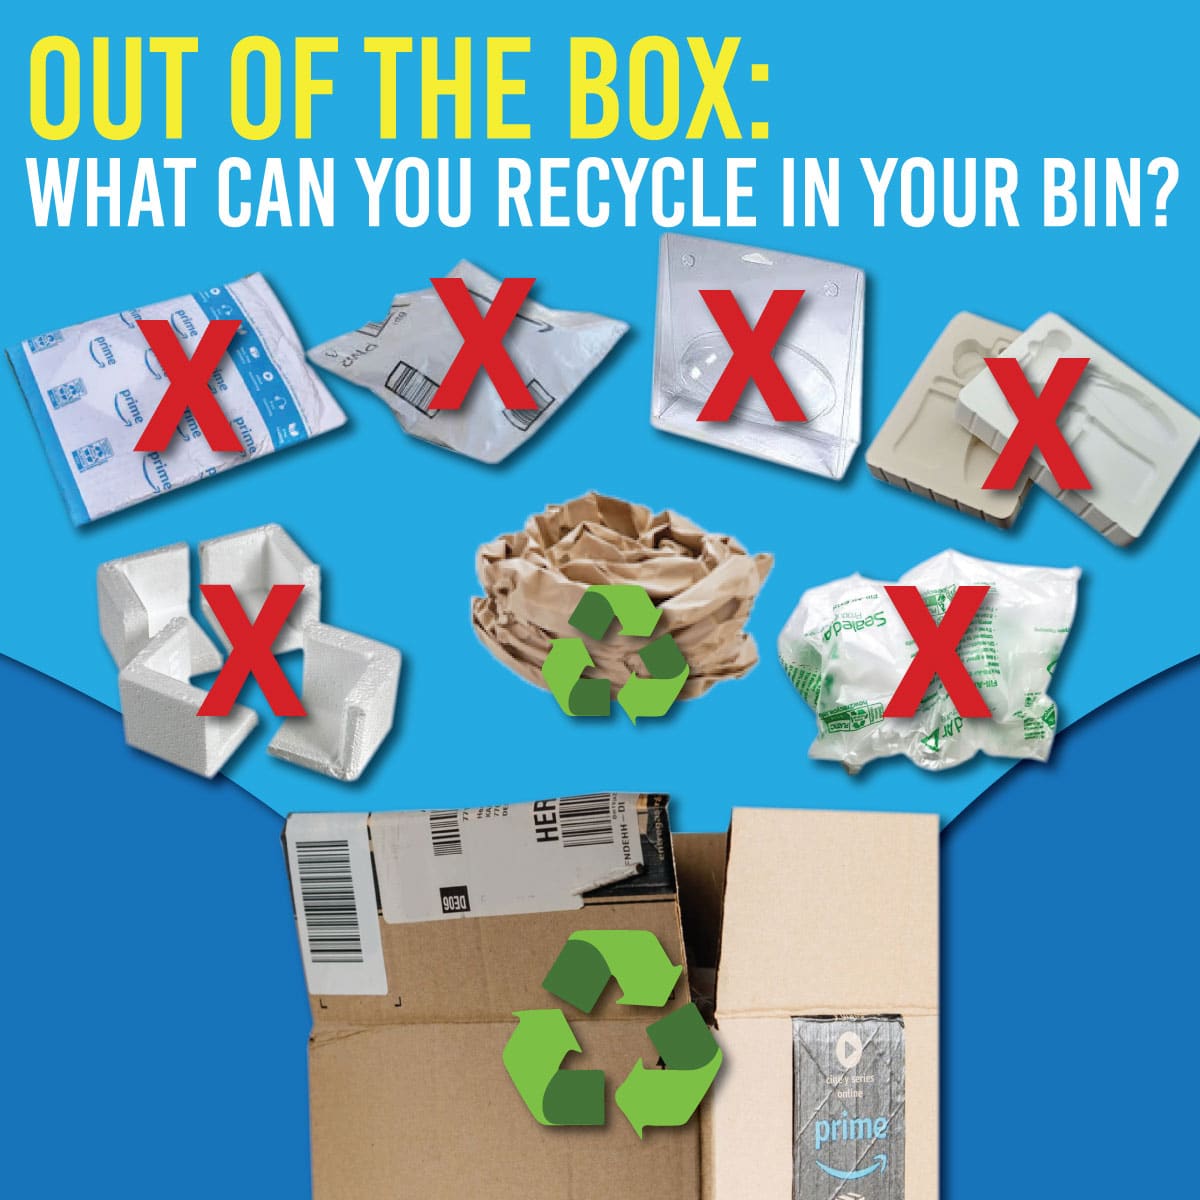 Ask the Experts: What Can Be Recycled With Plastic Bags Through